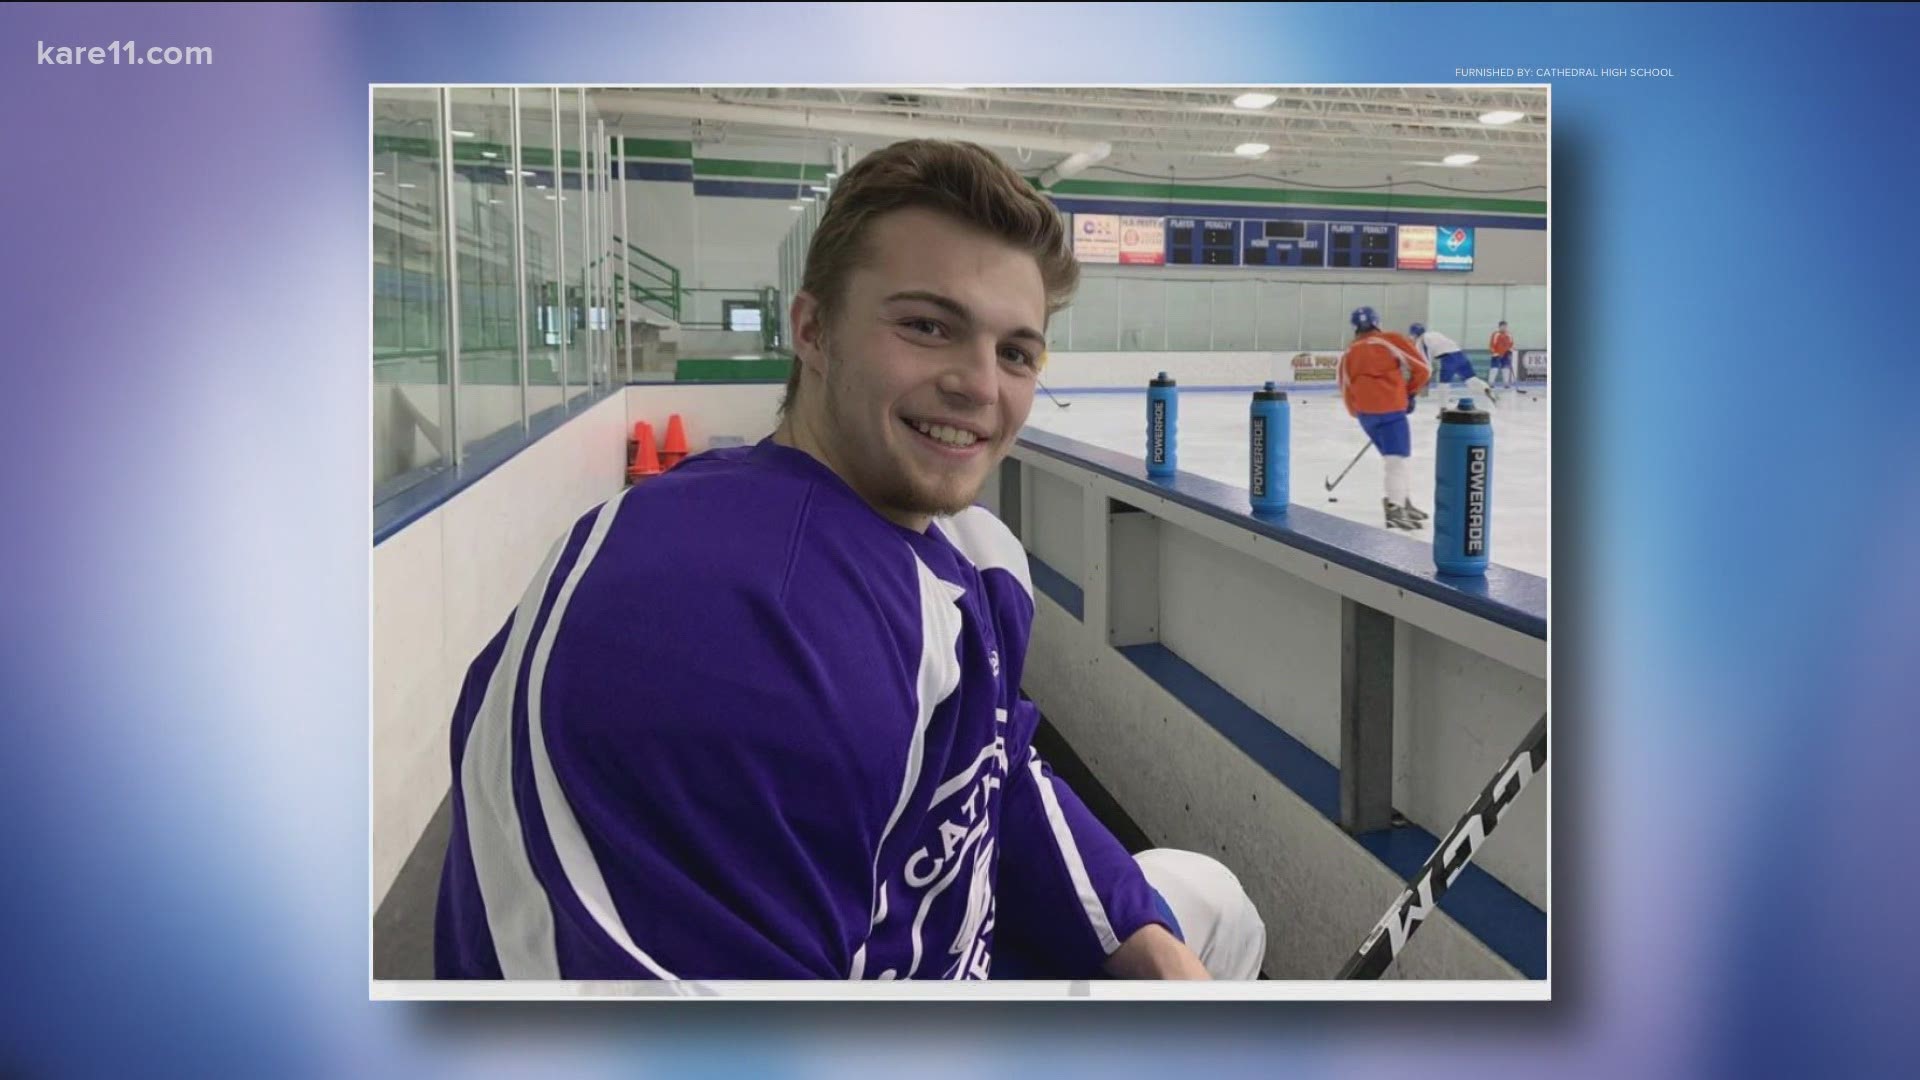 Tributes are flooding in for Mack Motzko. The 20-year-old hockey player was killed after a crash in Orono on Saturday night.